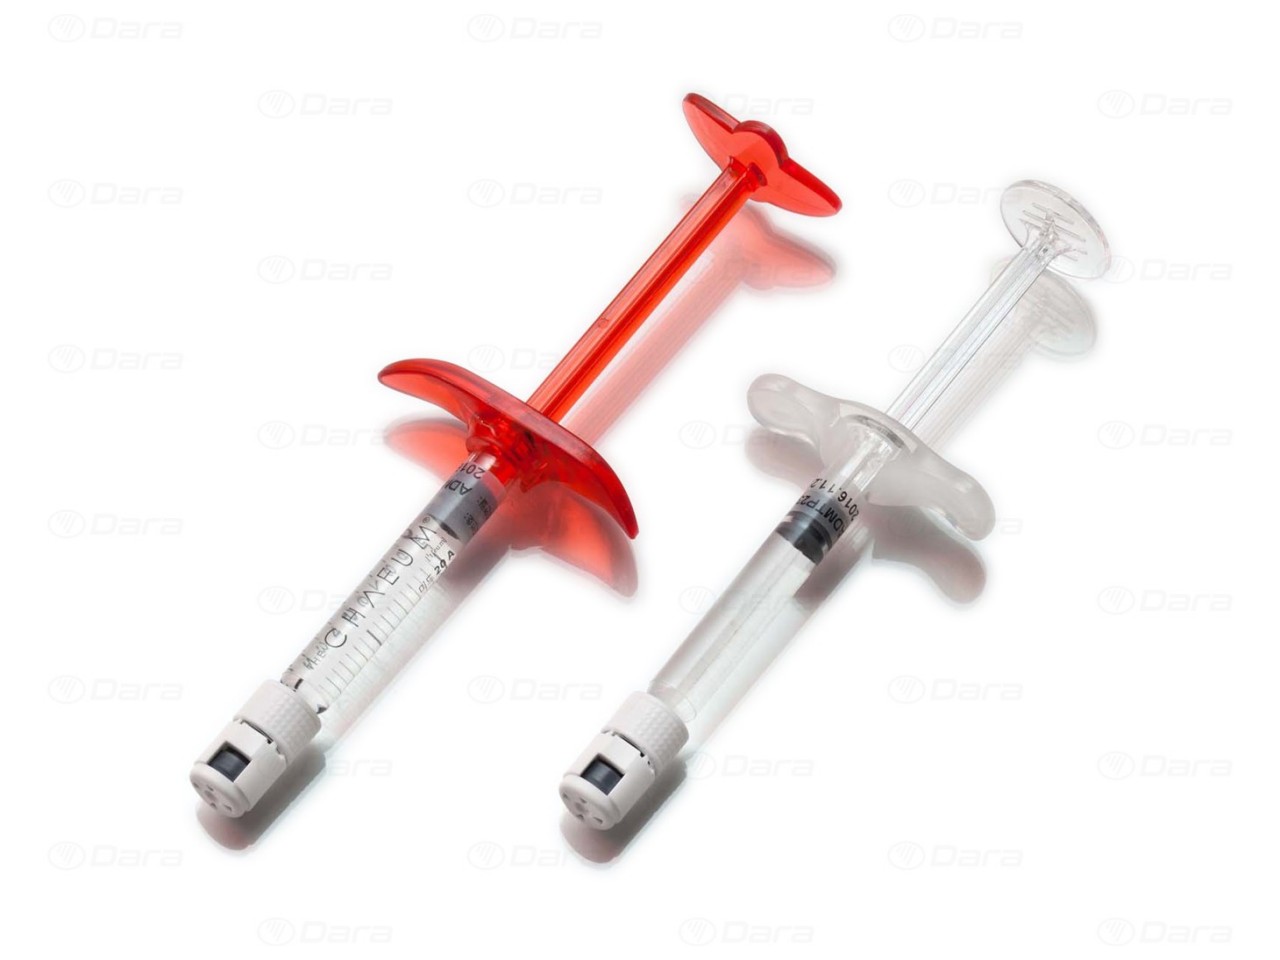 Syringe assembly and labeling